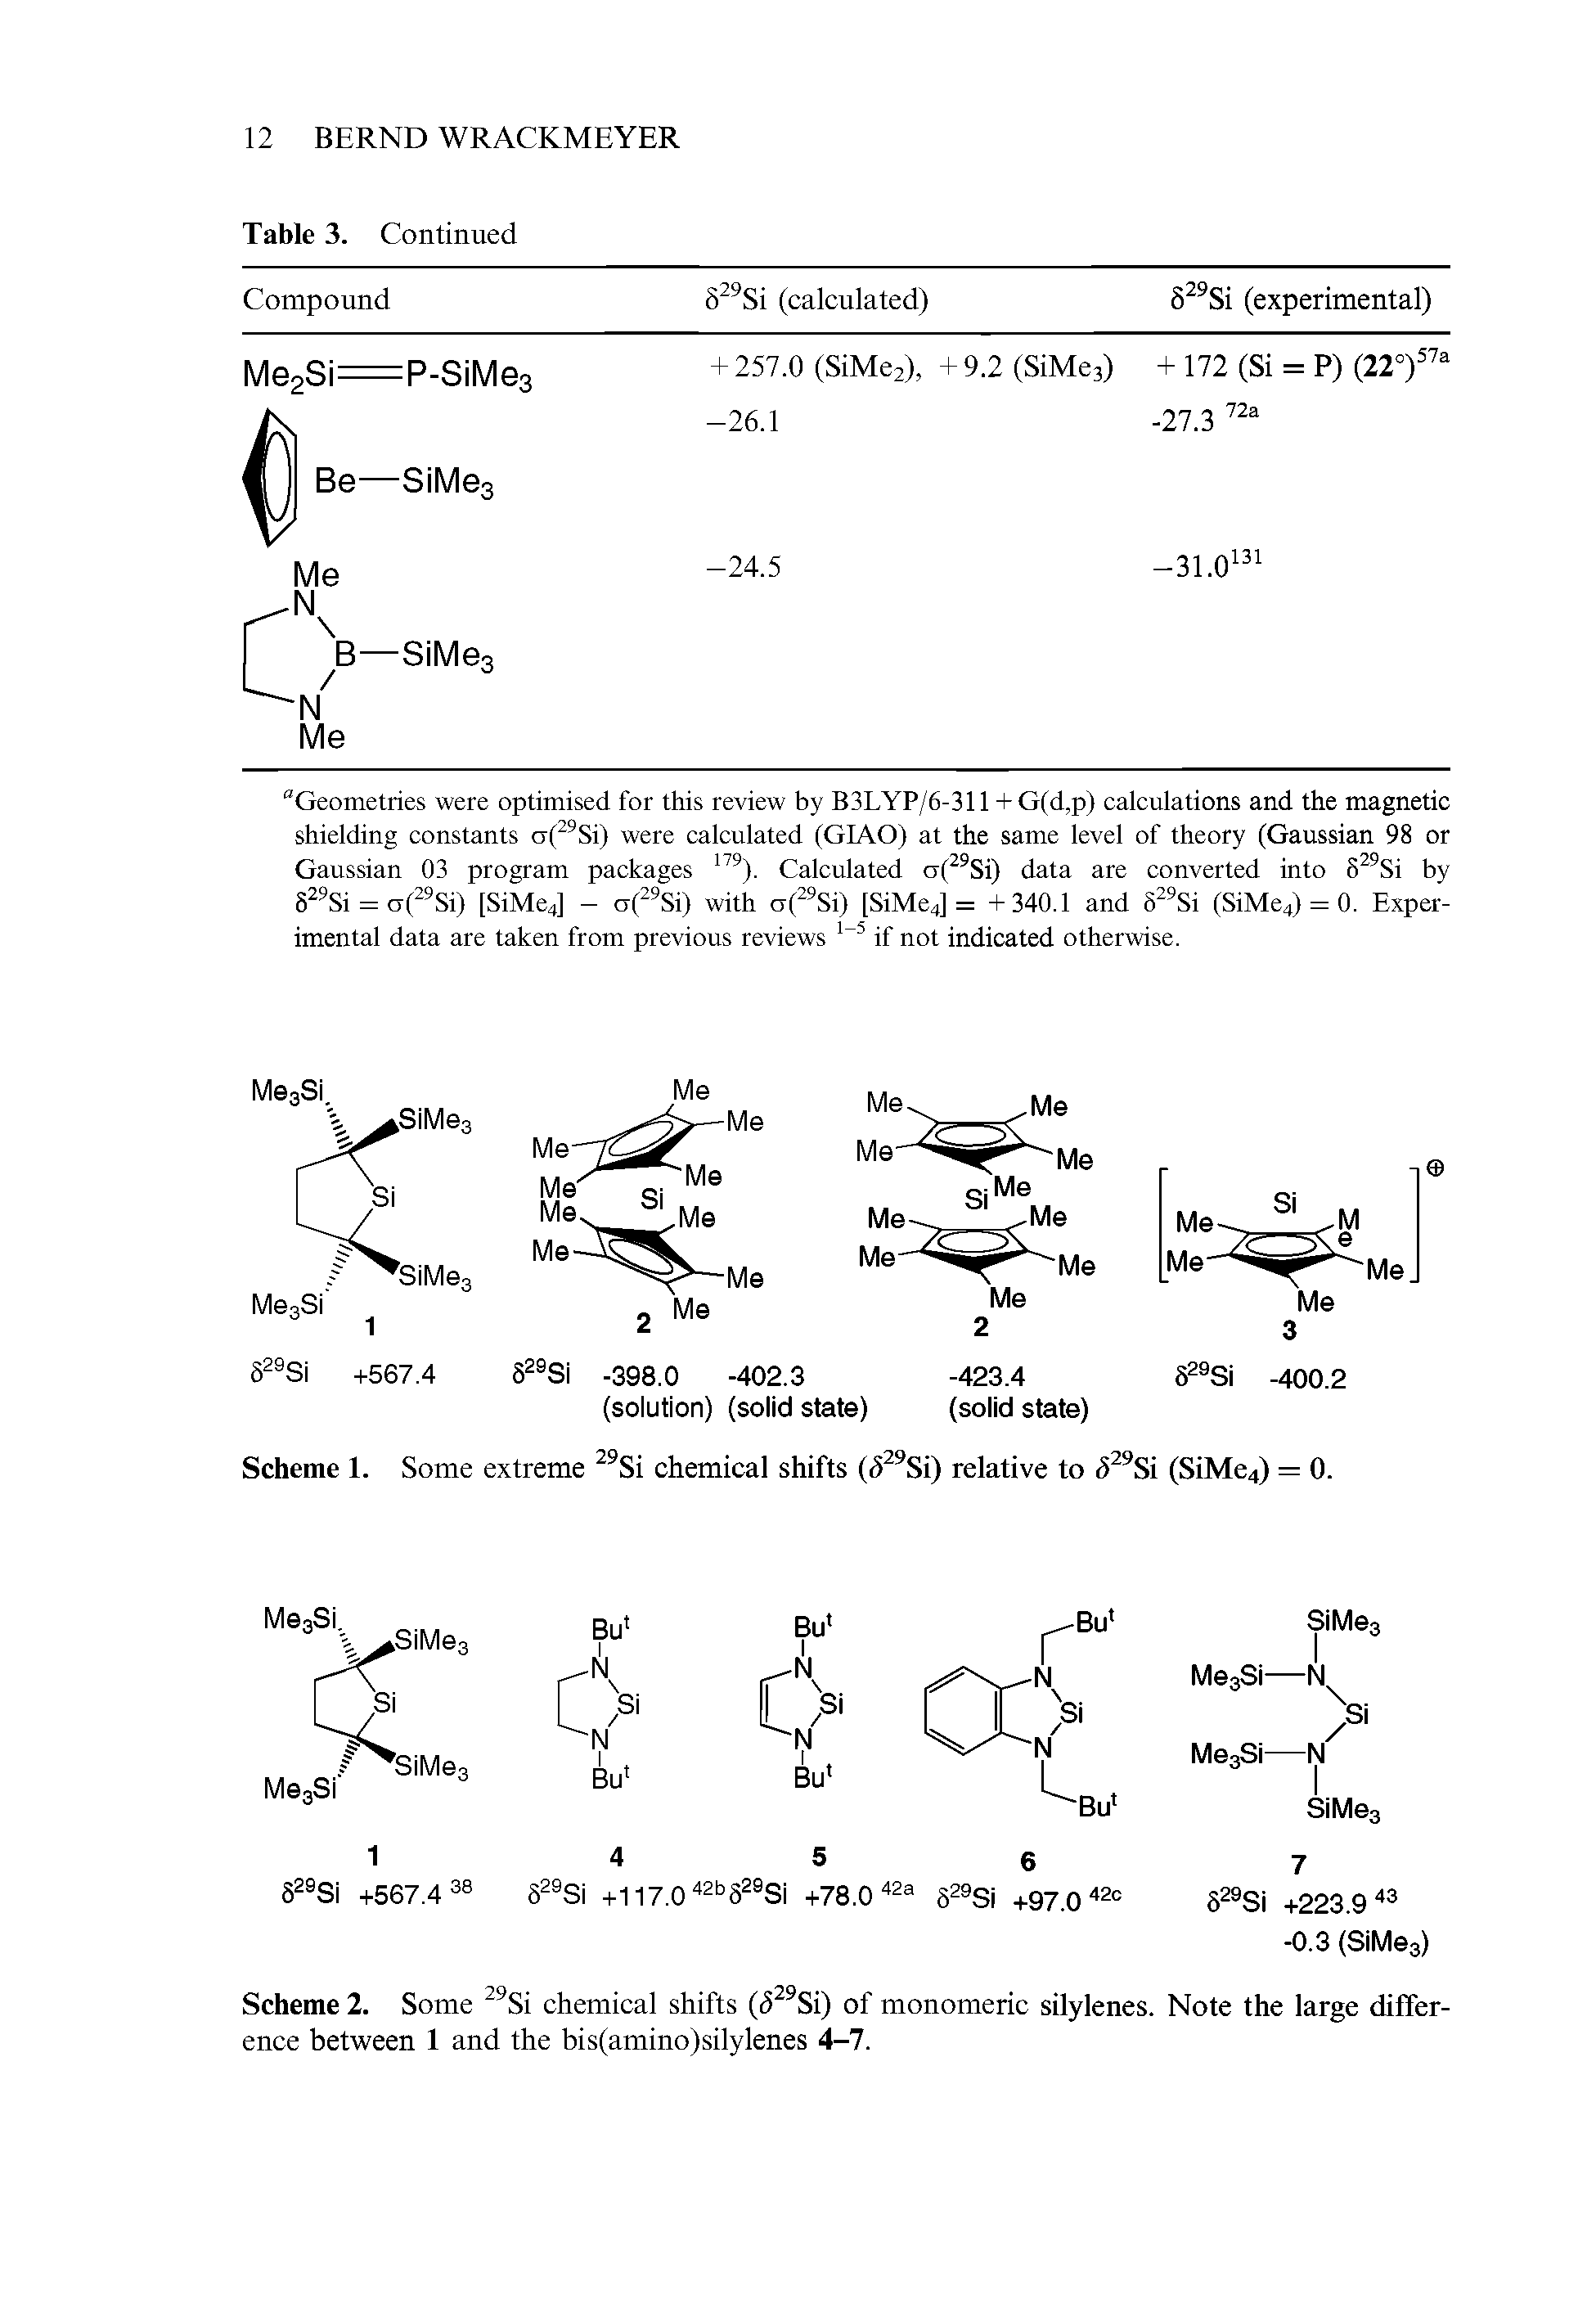 Scheme 2. Some Si chemical shifts (i5 Si) of monomeric silylenes. Note the large difference between 1 and the bis(amino)silylenes 4-7.